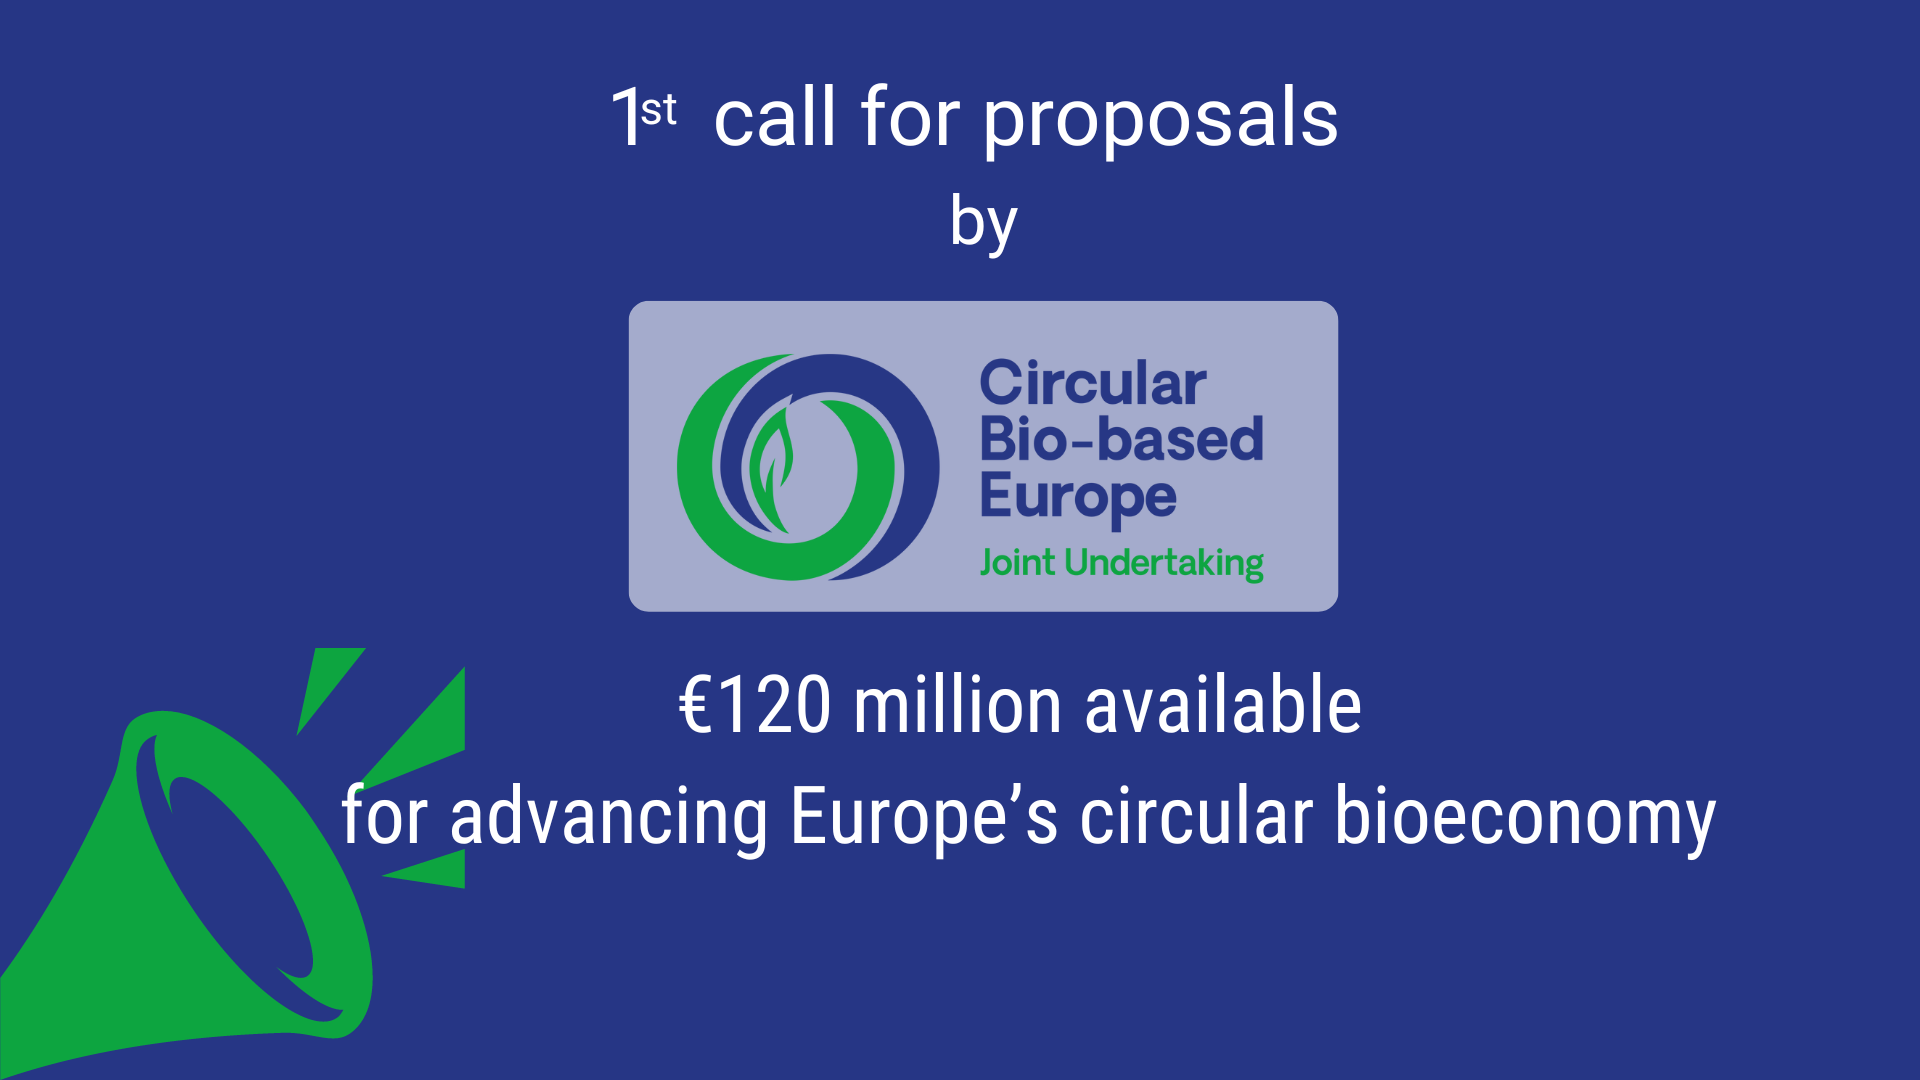 €120 million available for advancing Europe’s circular bioeconomy